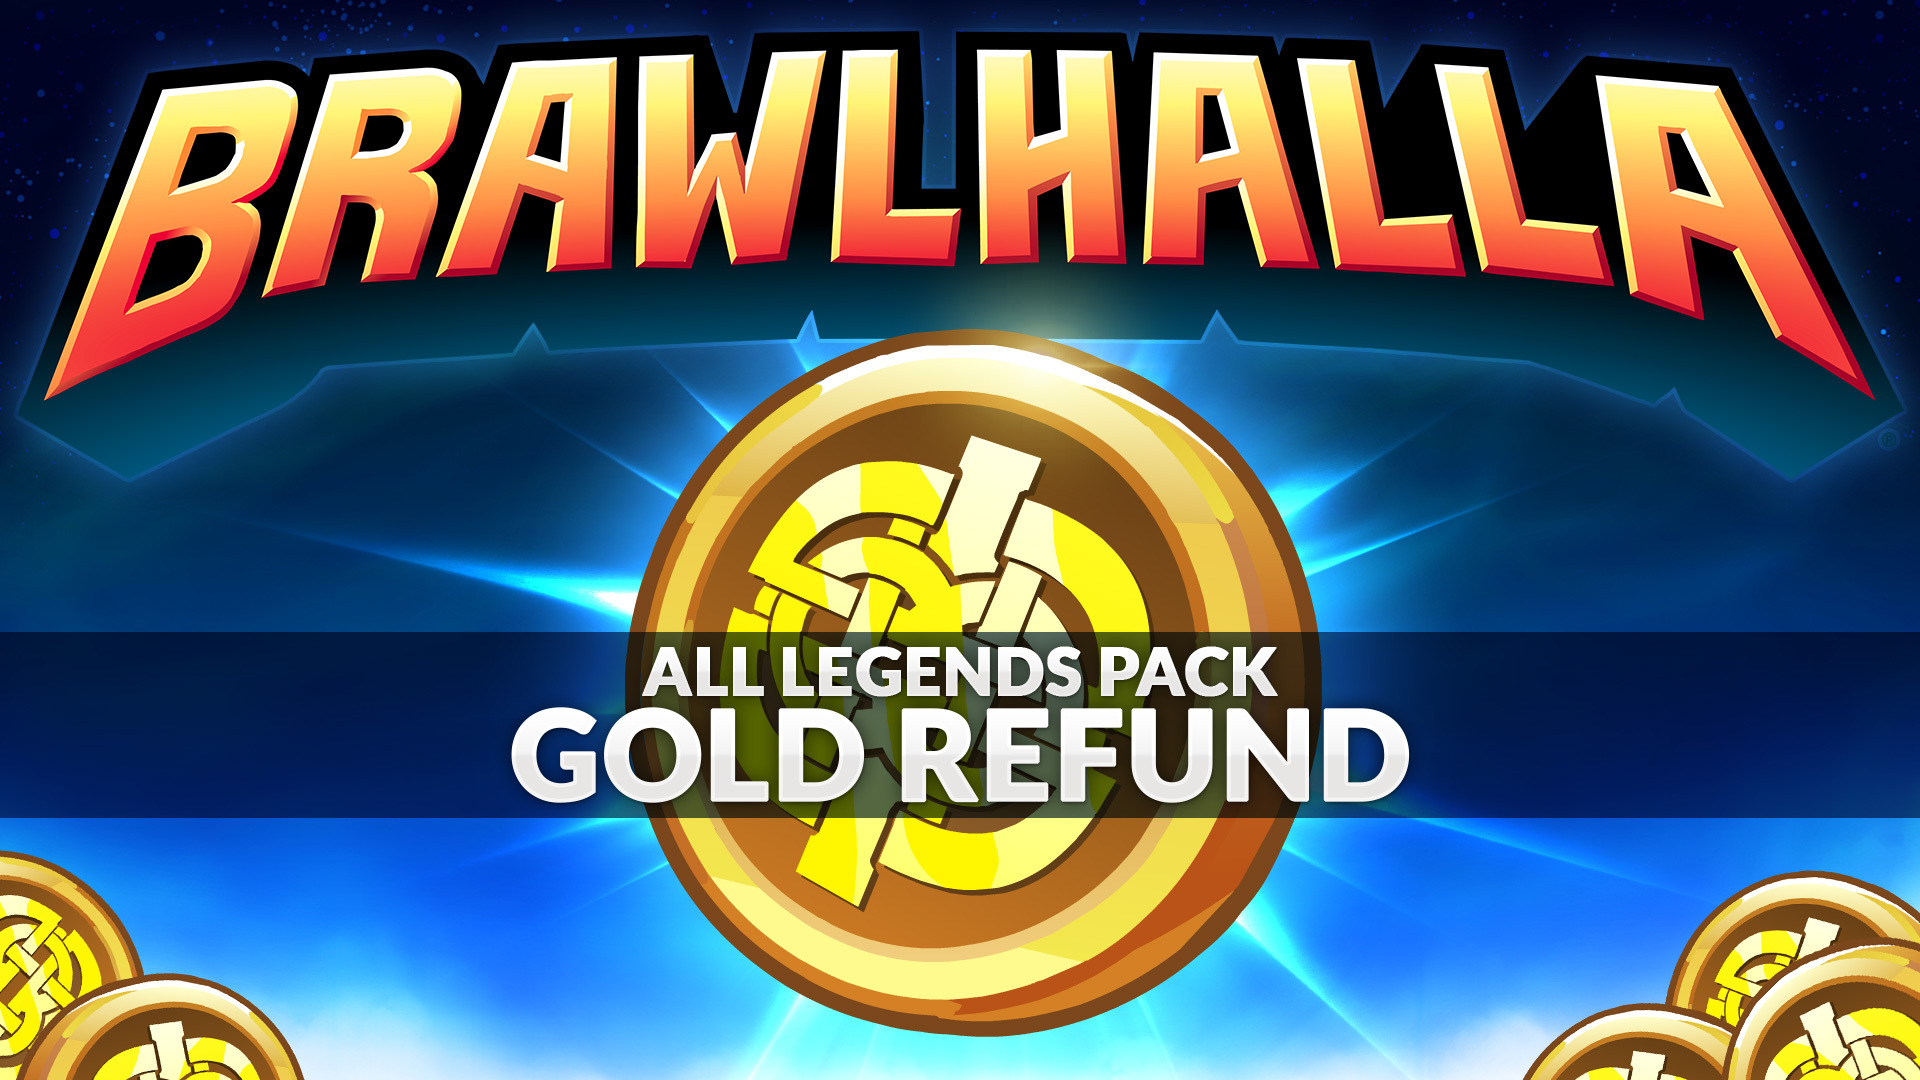 All Legends Pack Gold Refund for Previously Purchased Legends